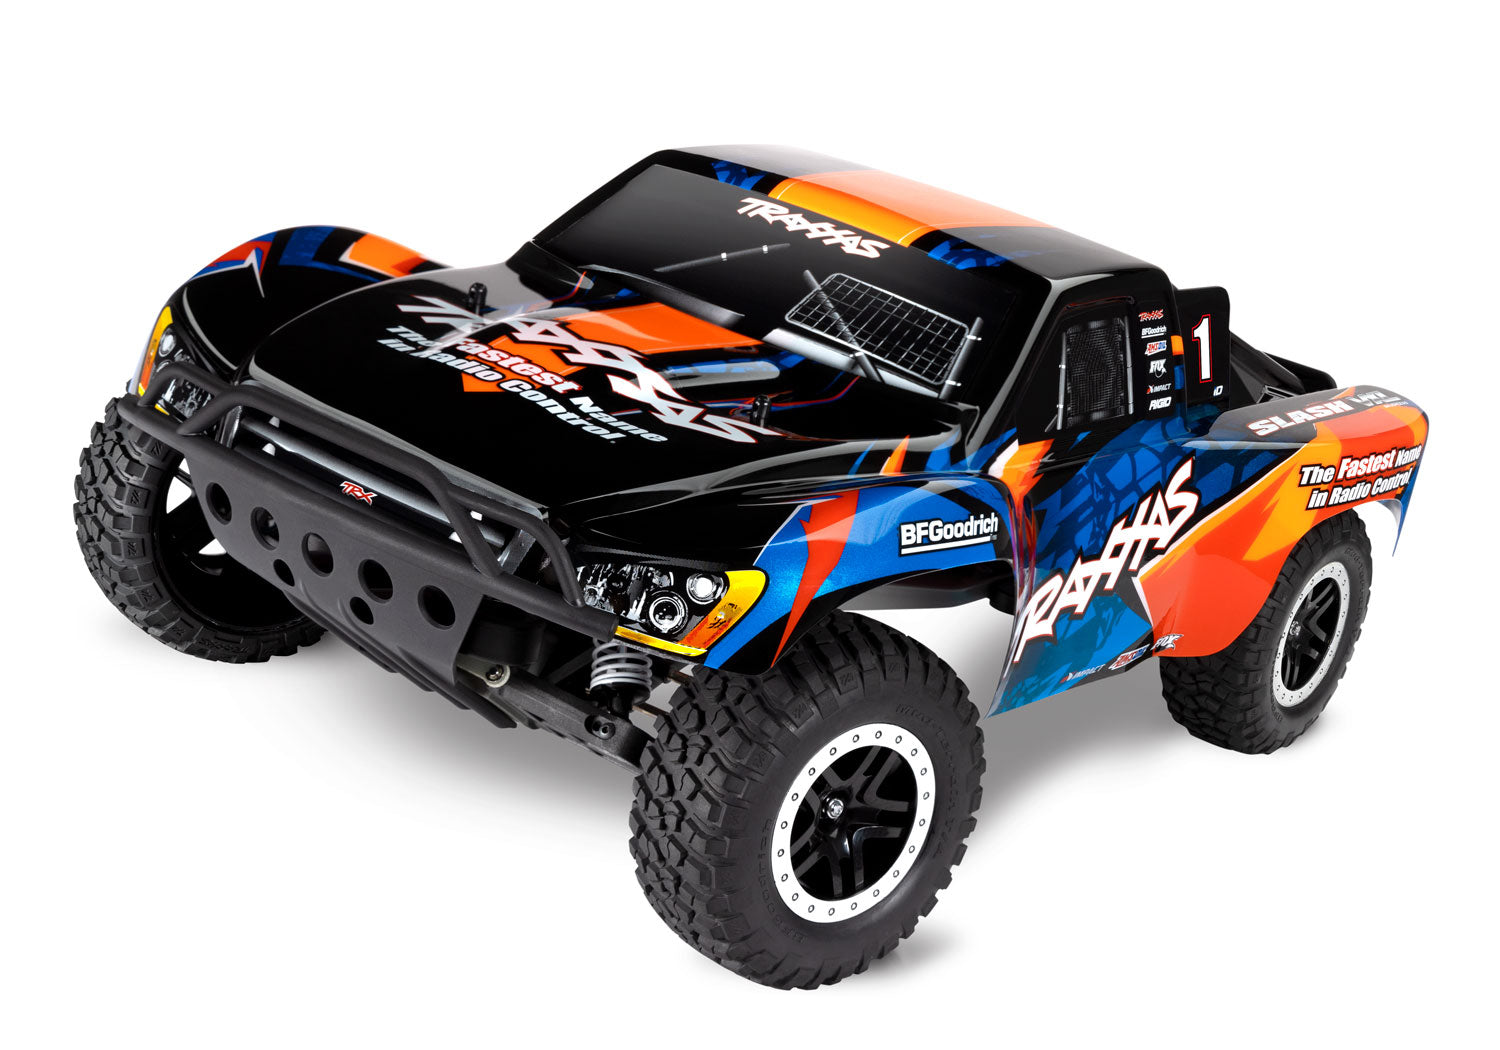 TRAXXAS 58076-74 Slash VXL 1/10 scale 2WD short course truck. RTR, with Traxxas Stability Management TSM®, TQi™ 2.4GHz radio system, Velineon® brushless power system, Magnum 272R™ transmission, and painted body.